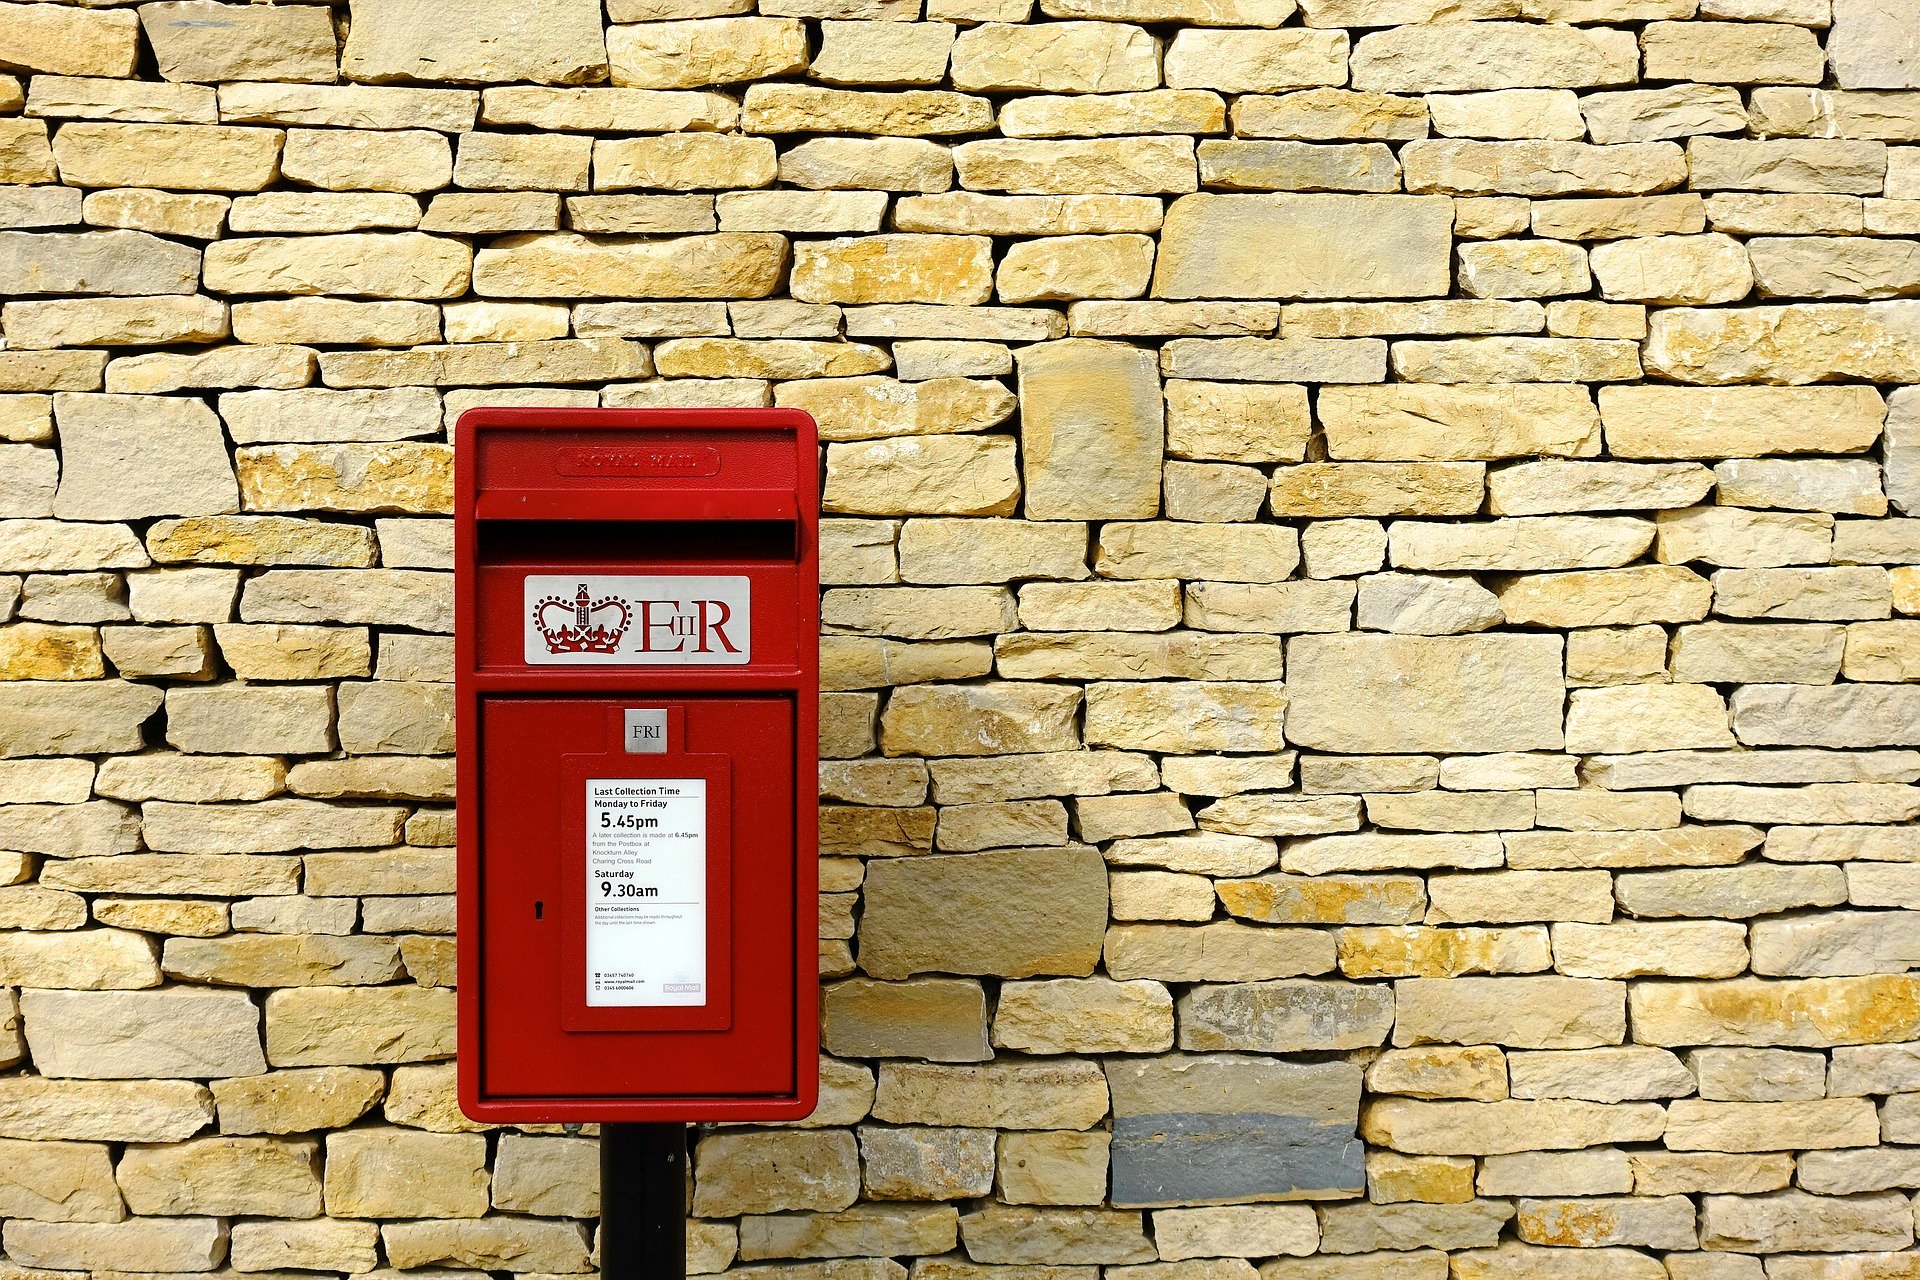 Post boxes retaining the ERII insignia will remain in place.